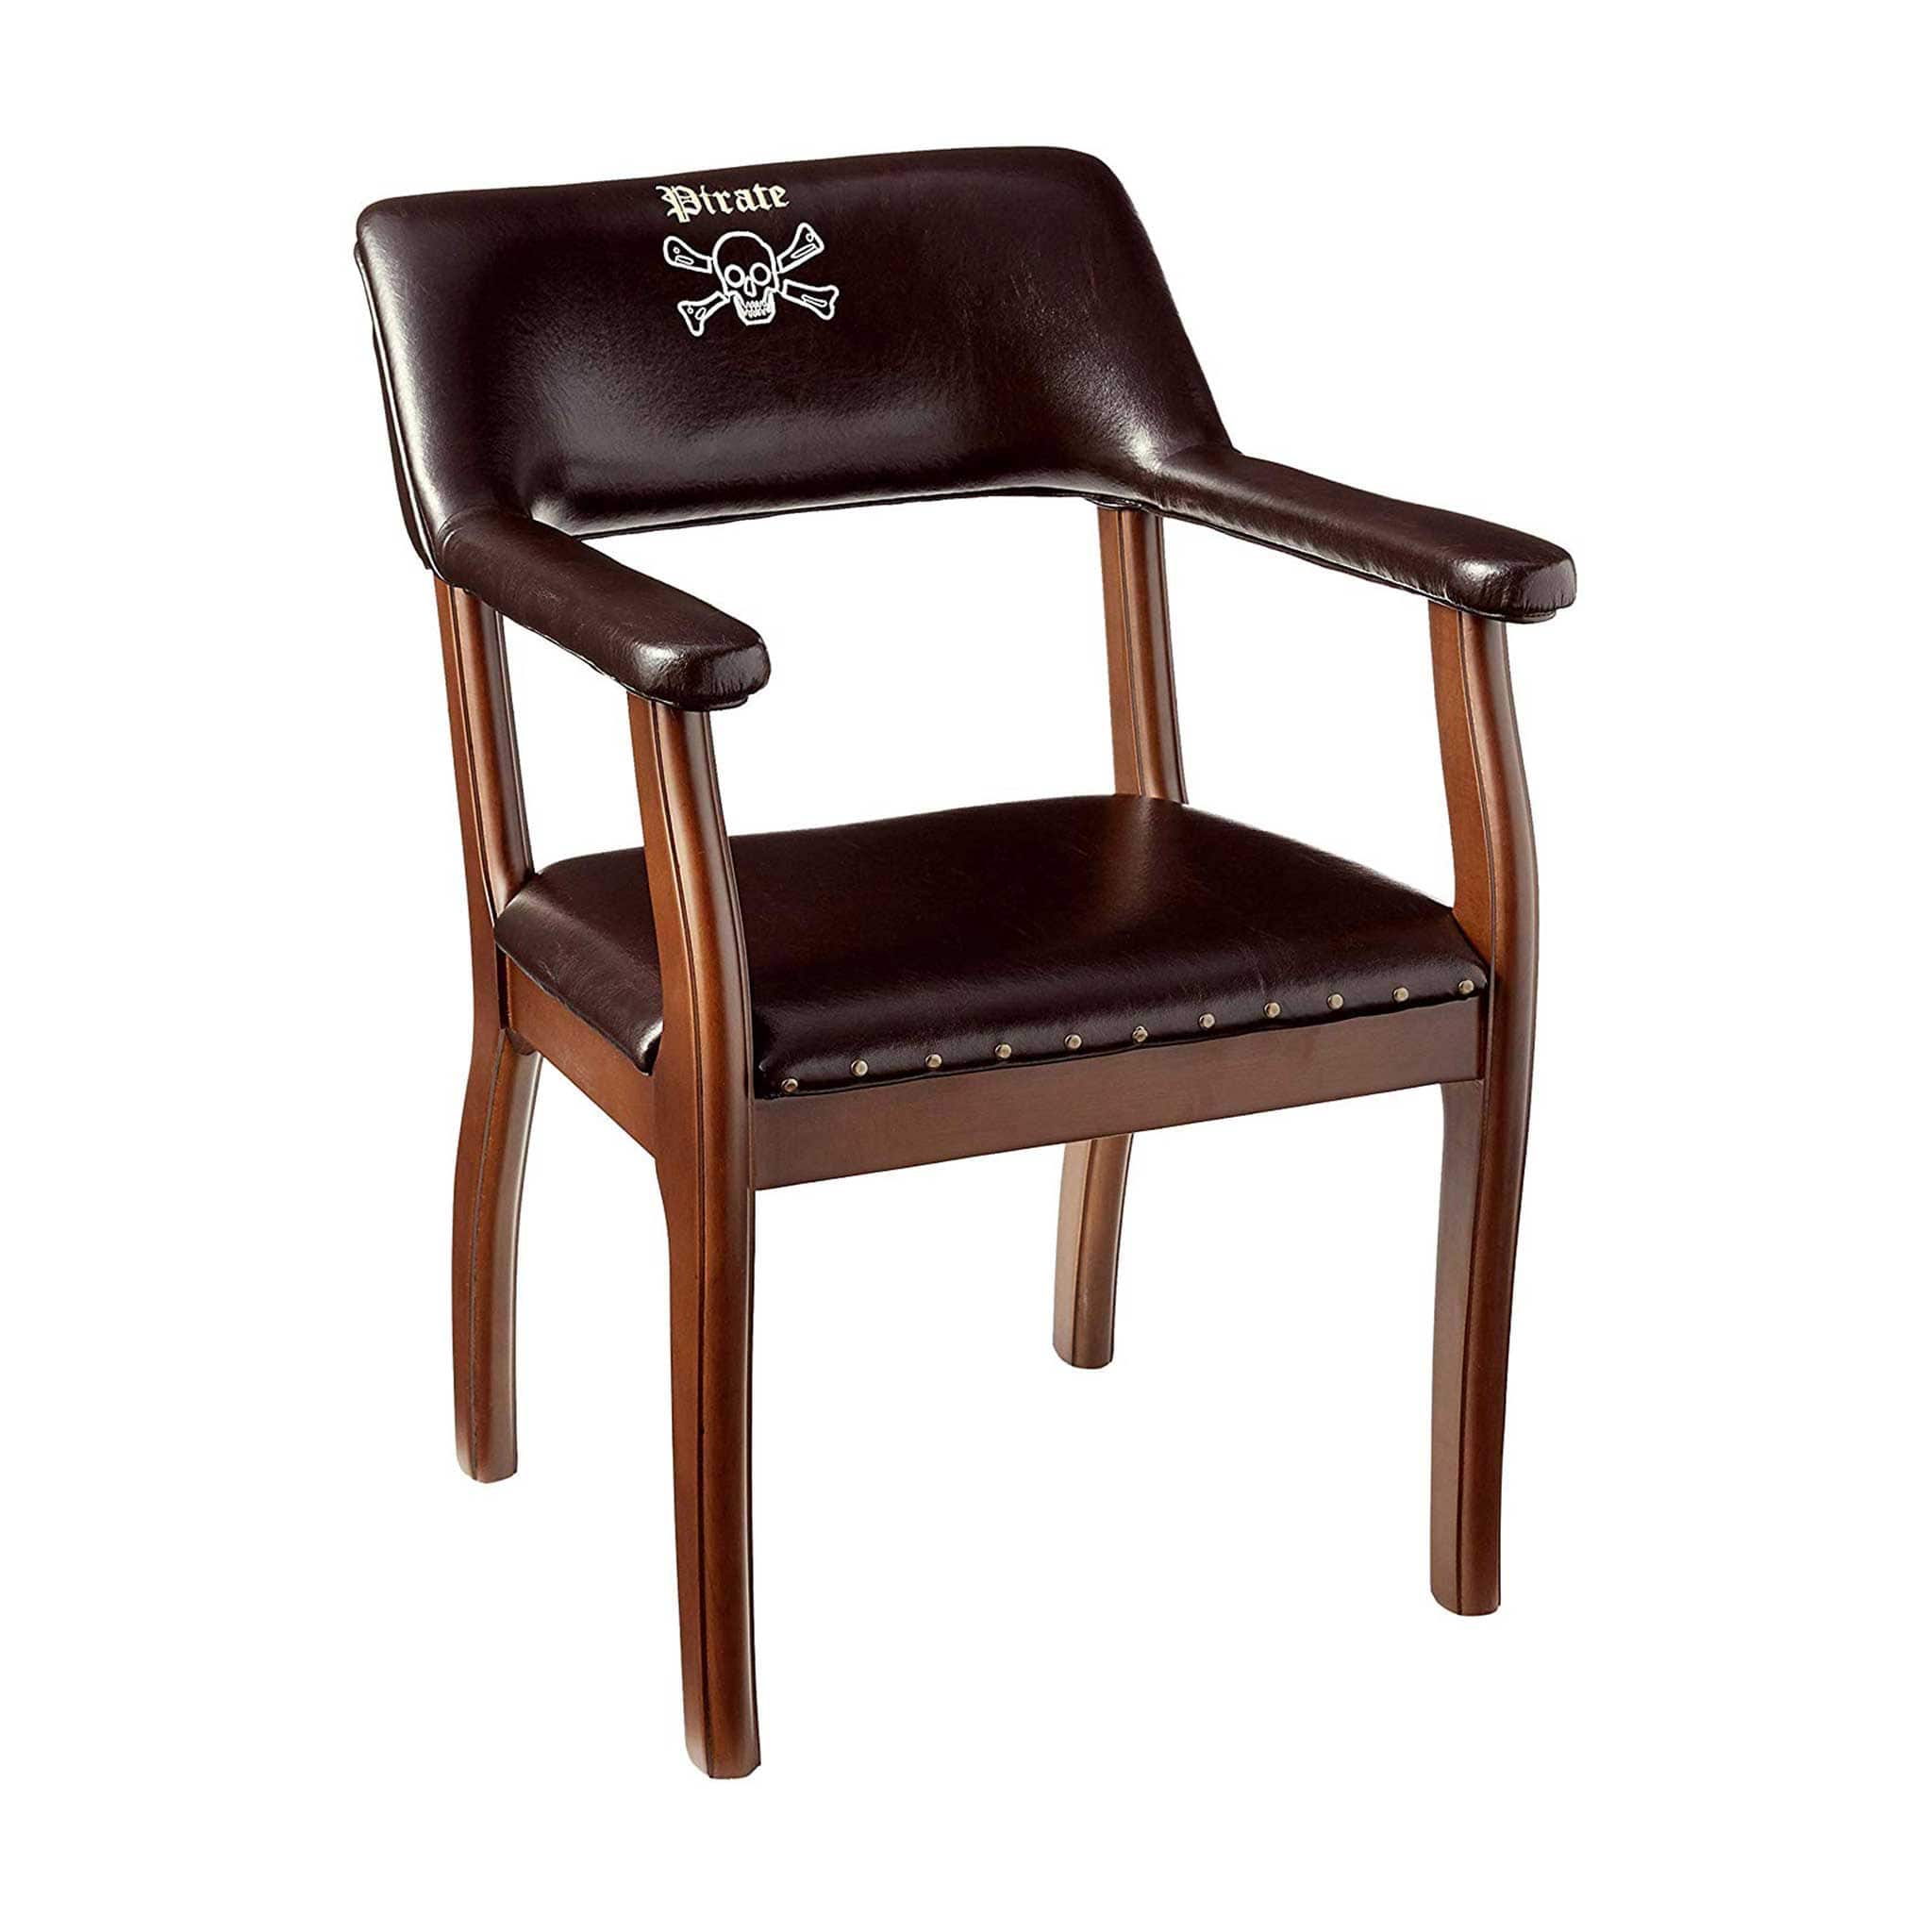 Pirate Brown Leatherette Chair